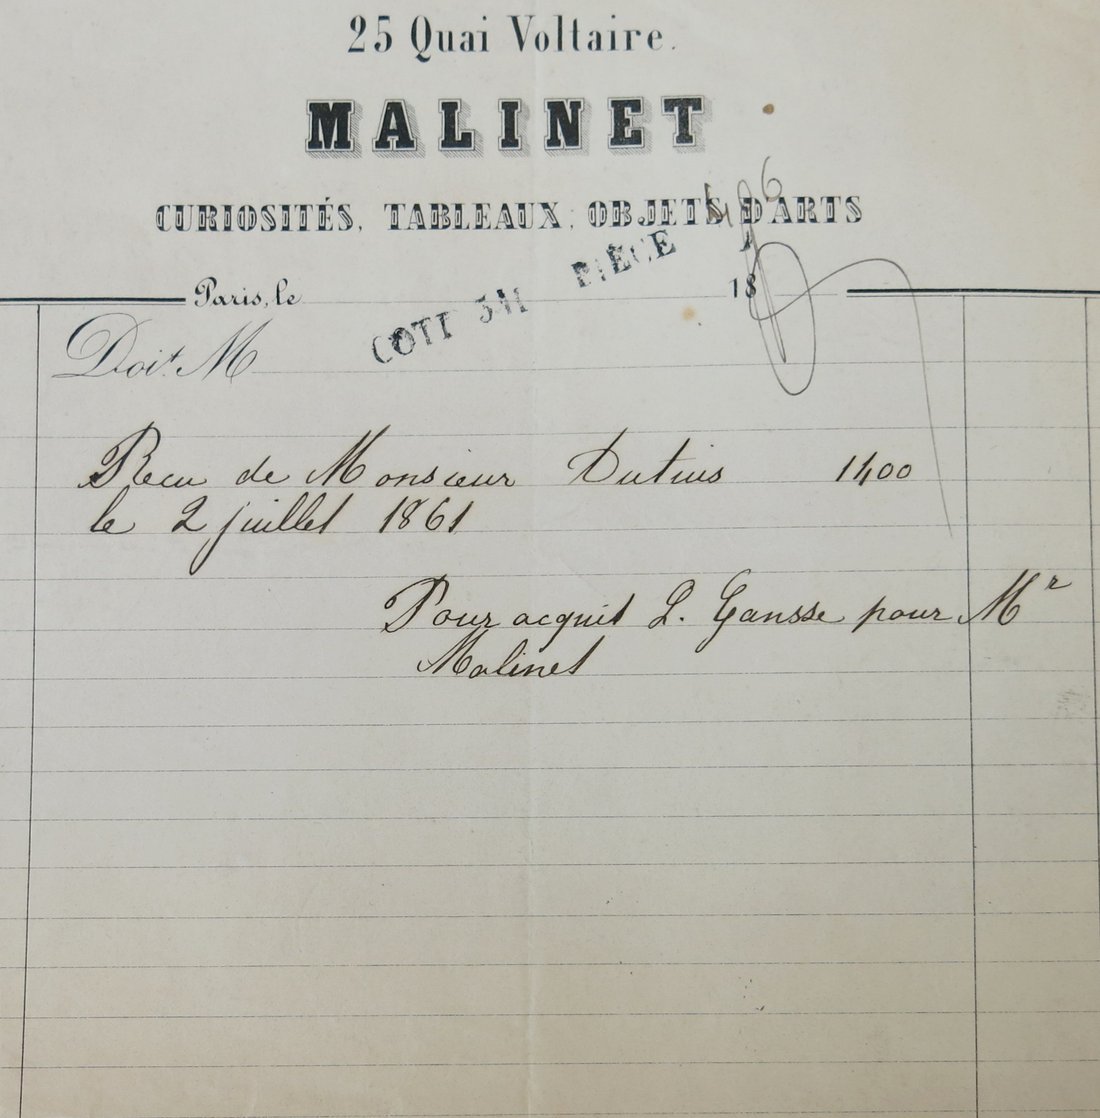 Photograph of a bill with a letterhead bearing the name of Malinet